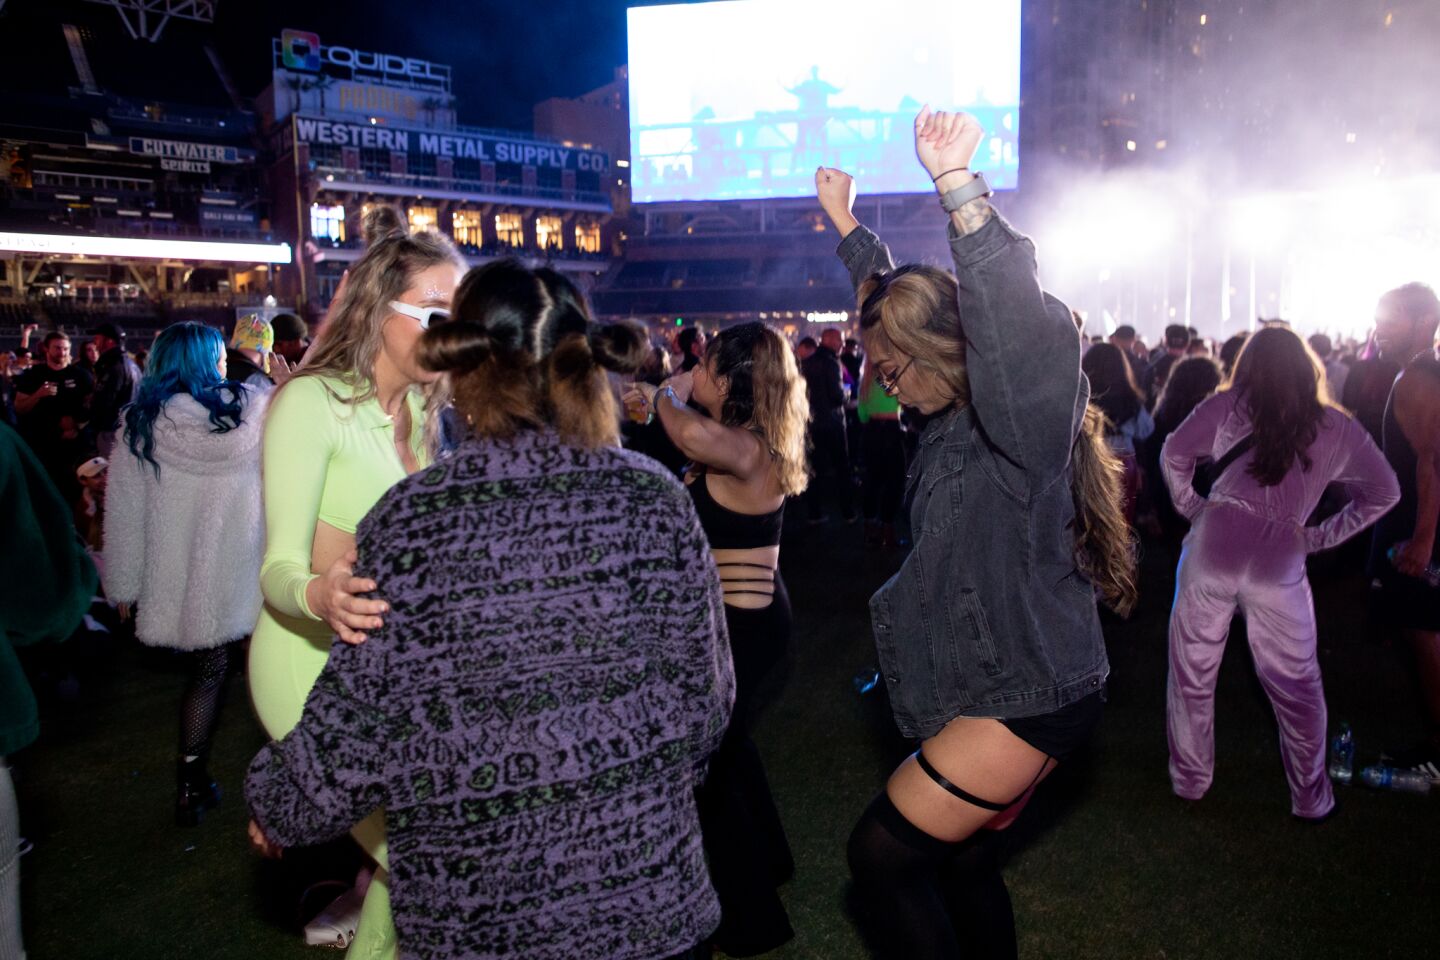 It was a packed house at the latest DAY.MVS in the Park concert with headliner Claude VonStroke, along with Sonny Fodera, John Summit, Vintage Culture and more on Saturday, Dec. 11, 2021 at Petco Park.